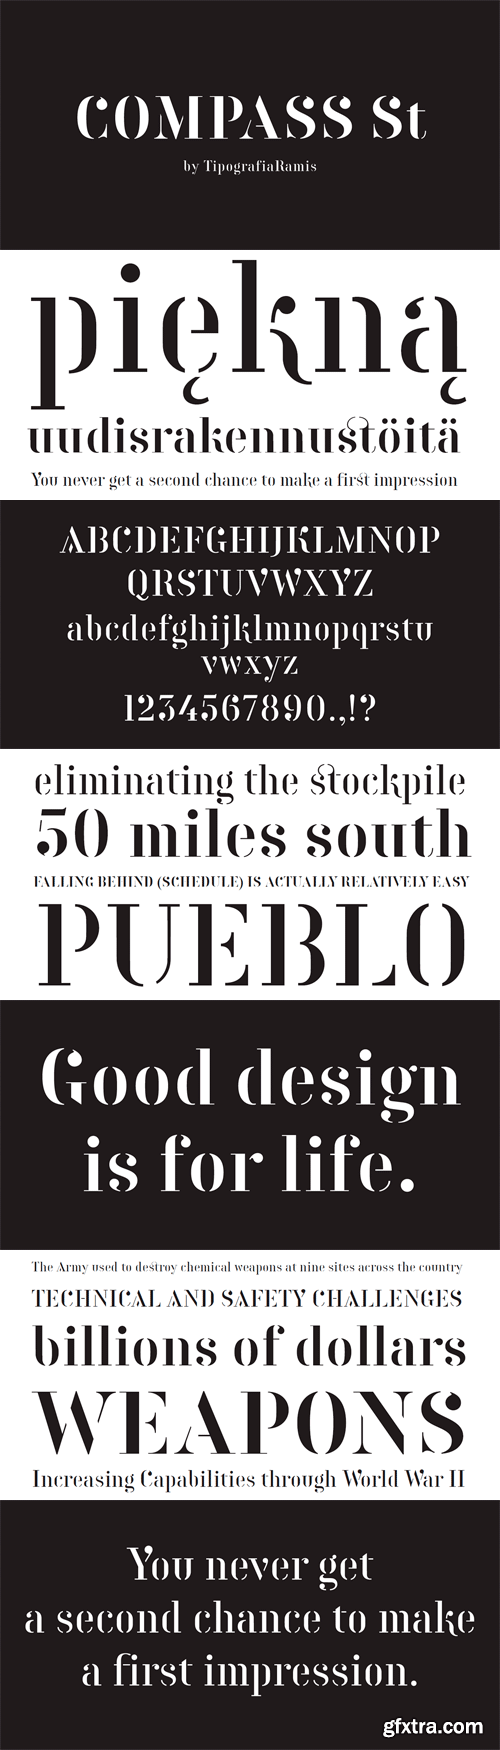 Compass St Font Family - 2 Fonts for $67